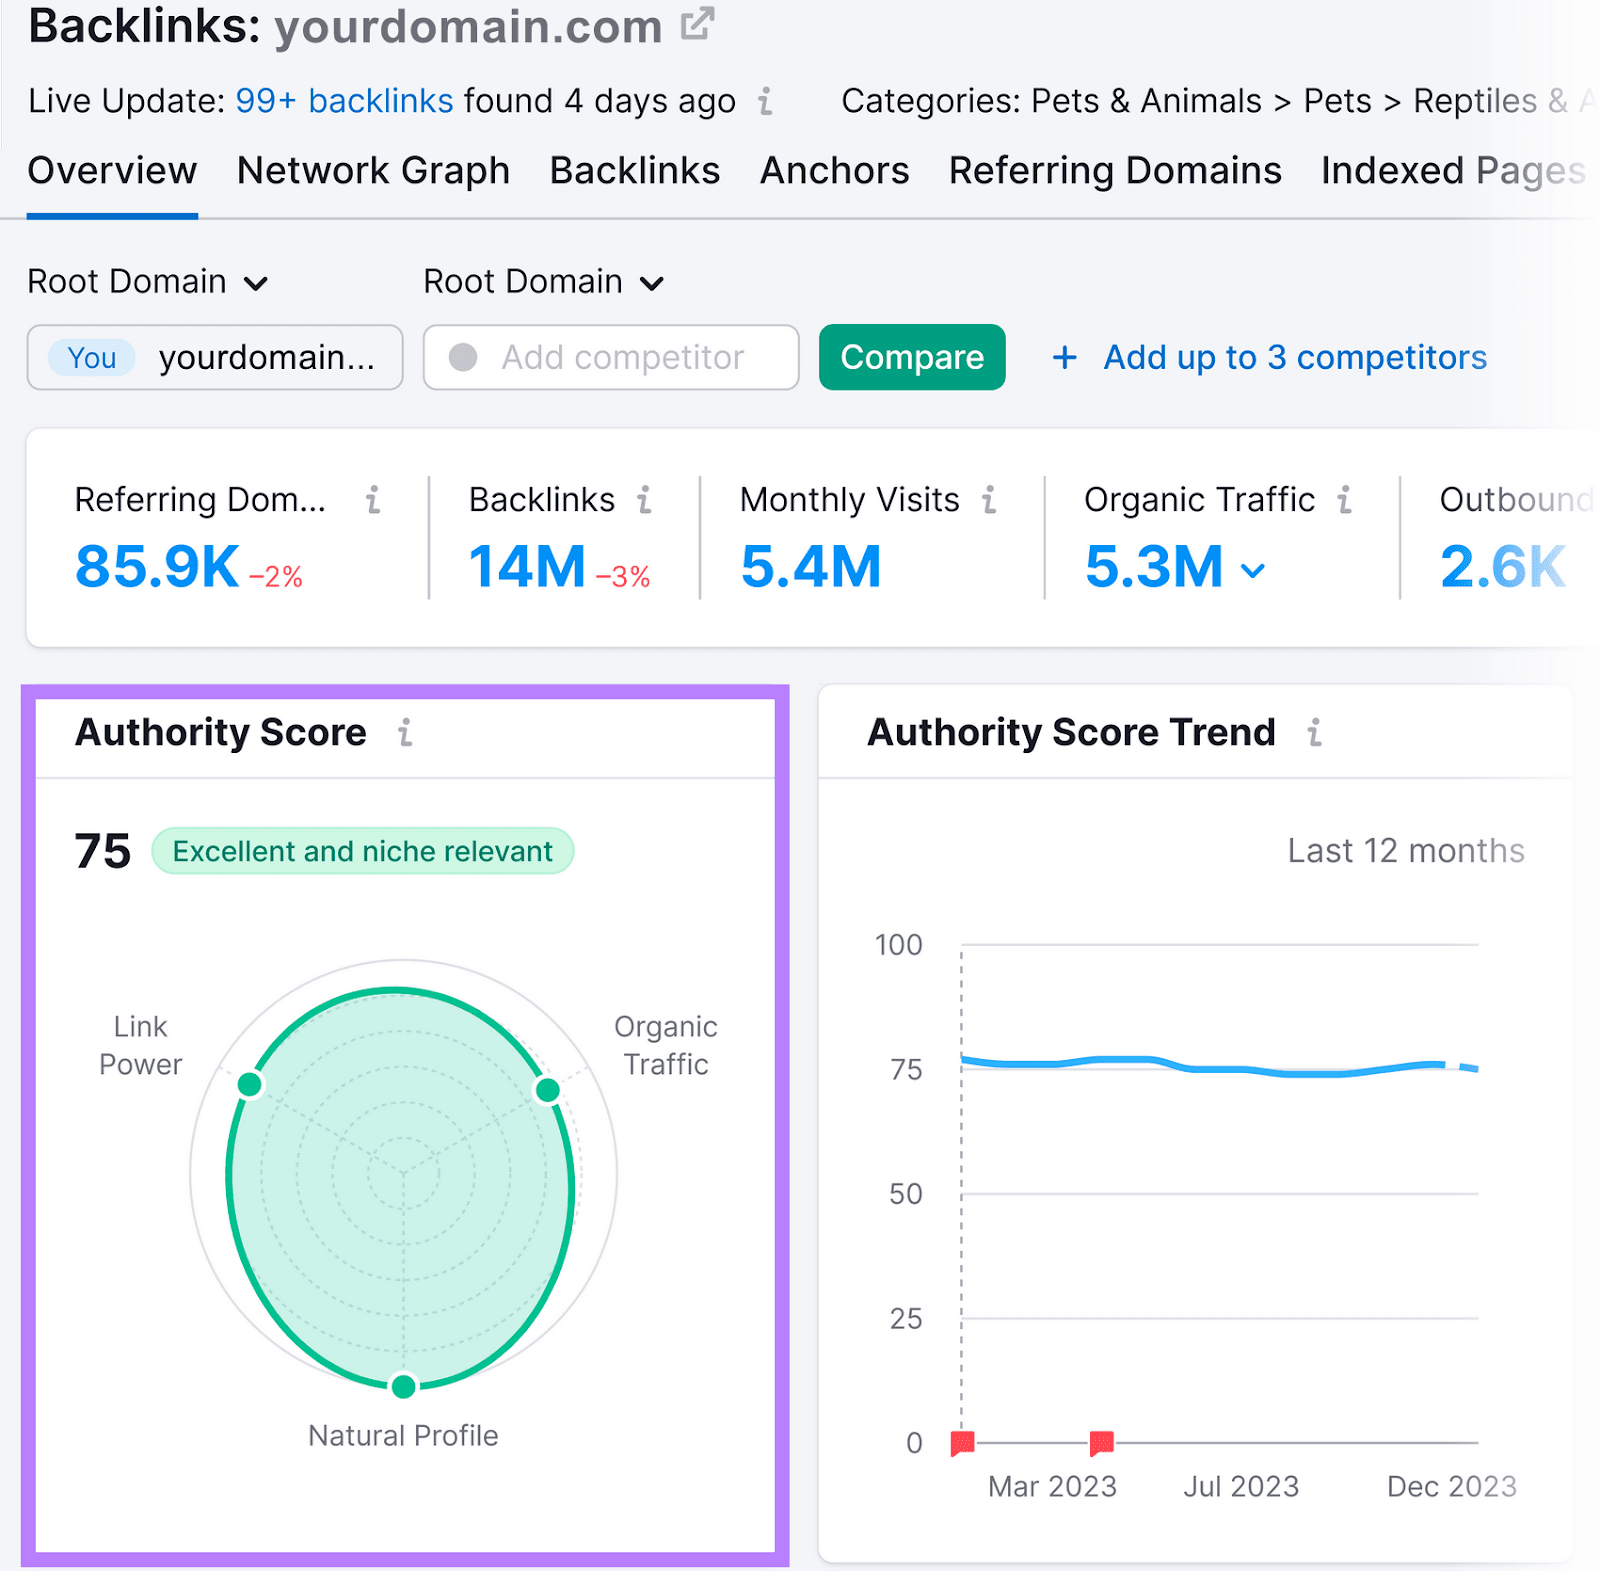 "Authority Score" widget in Backlink Analytics overview dashboard shows how the metric is spread across the three key factors: link power, organic traffic, and natural profile